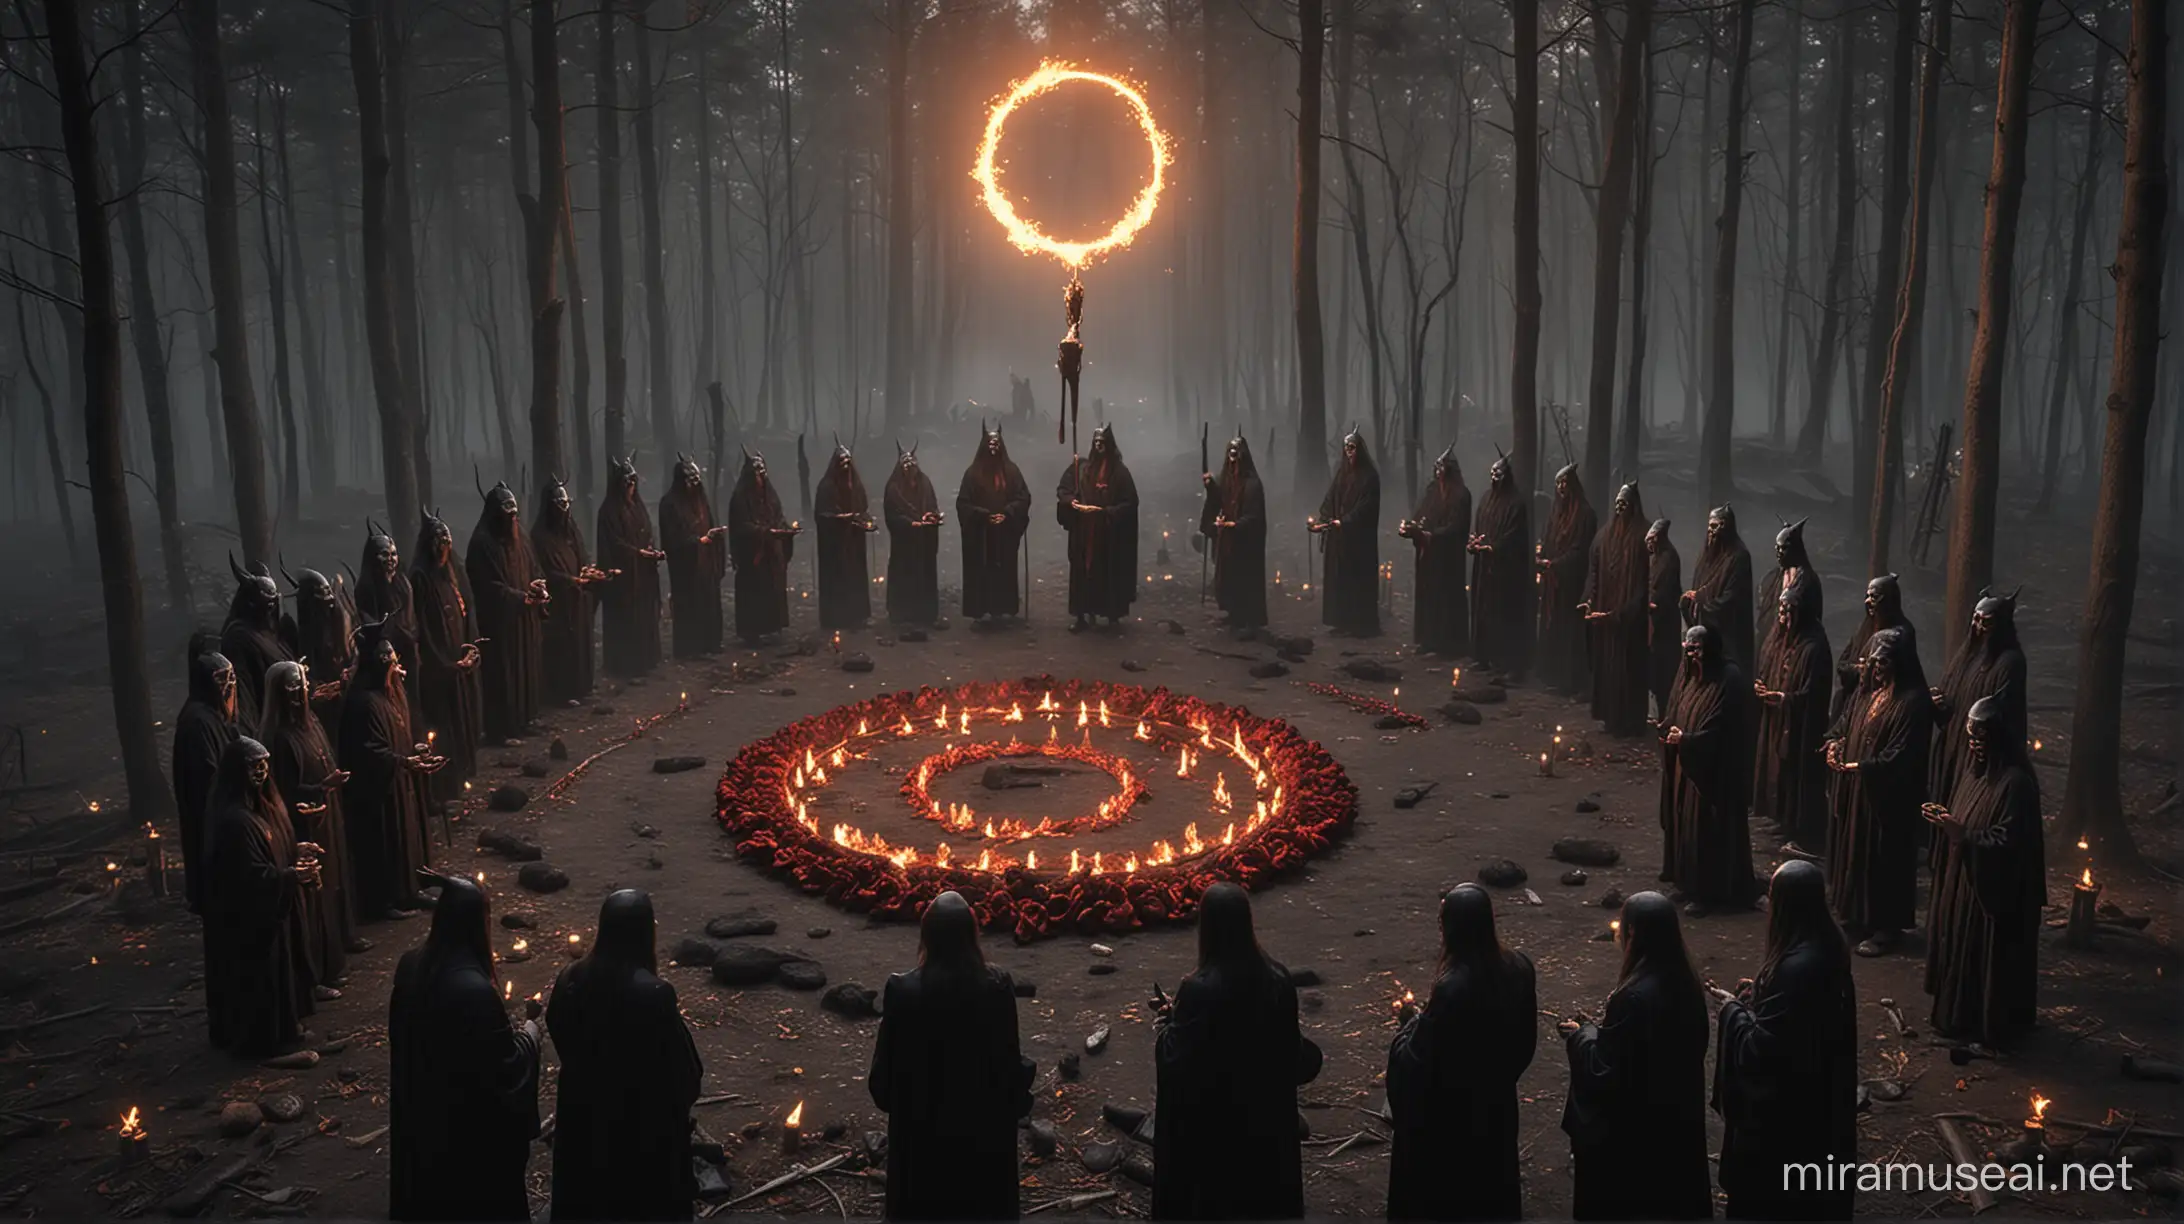 hyper-realism, ceremony, animal sacrifice, people in a circle, ring of fire, robes, devil horns, satanic cult, candles, forest, total solar eclipse, solar flares, devil, evil, long hair, naked, skulls, mutated bodies